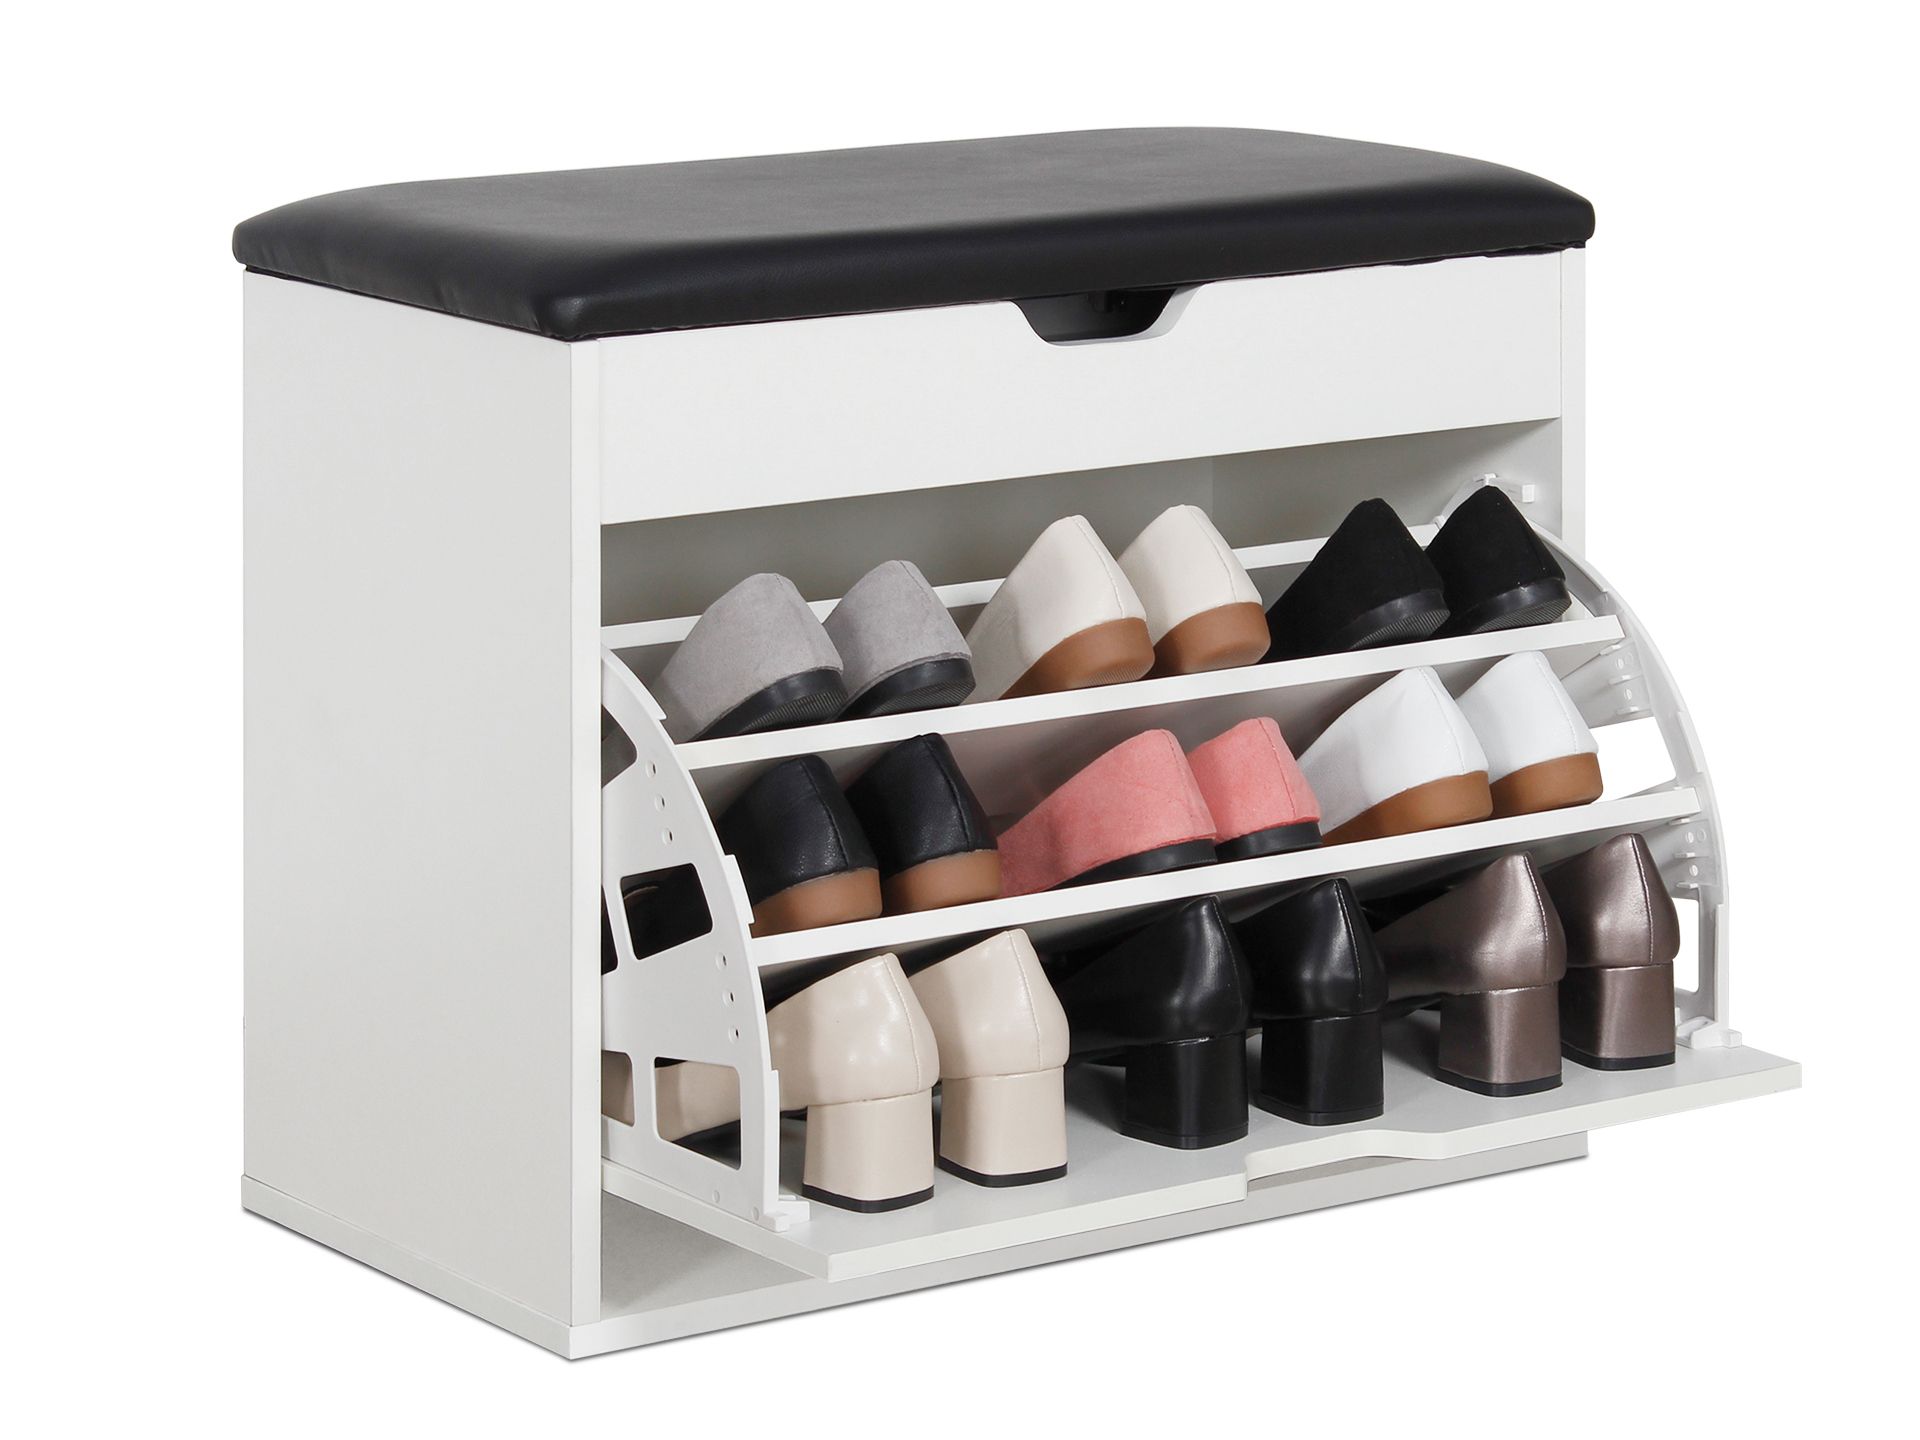 Hastings Home 1 Tier White Plastic Over-the-door Shoe Organizer at